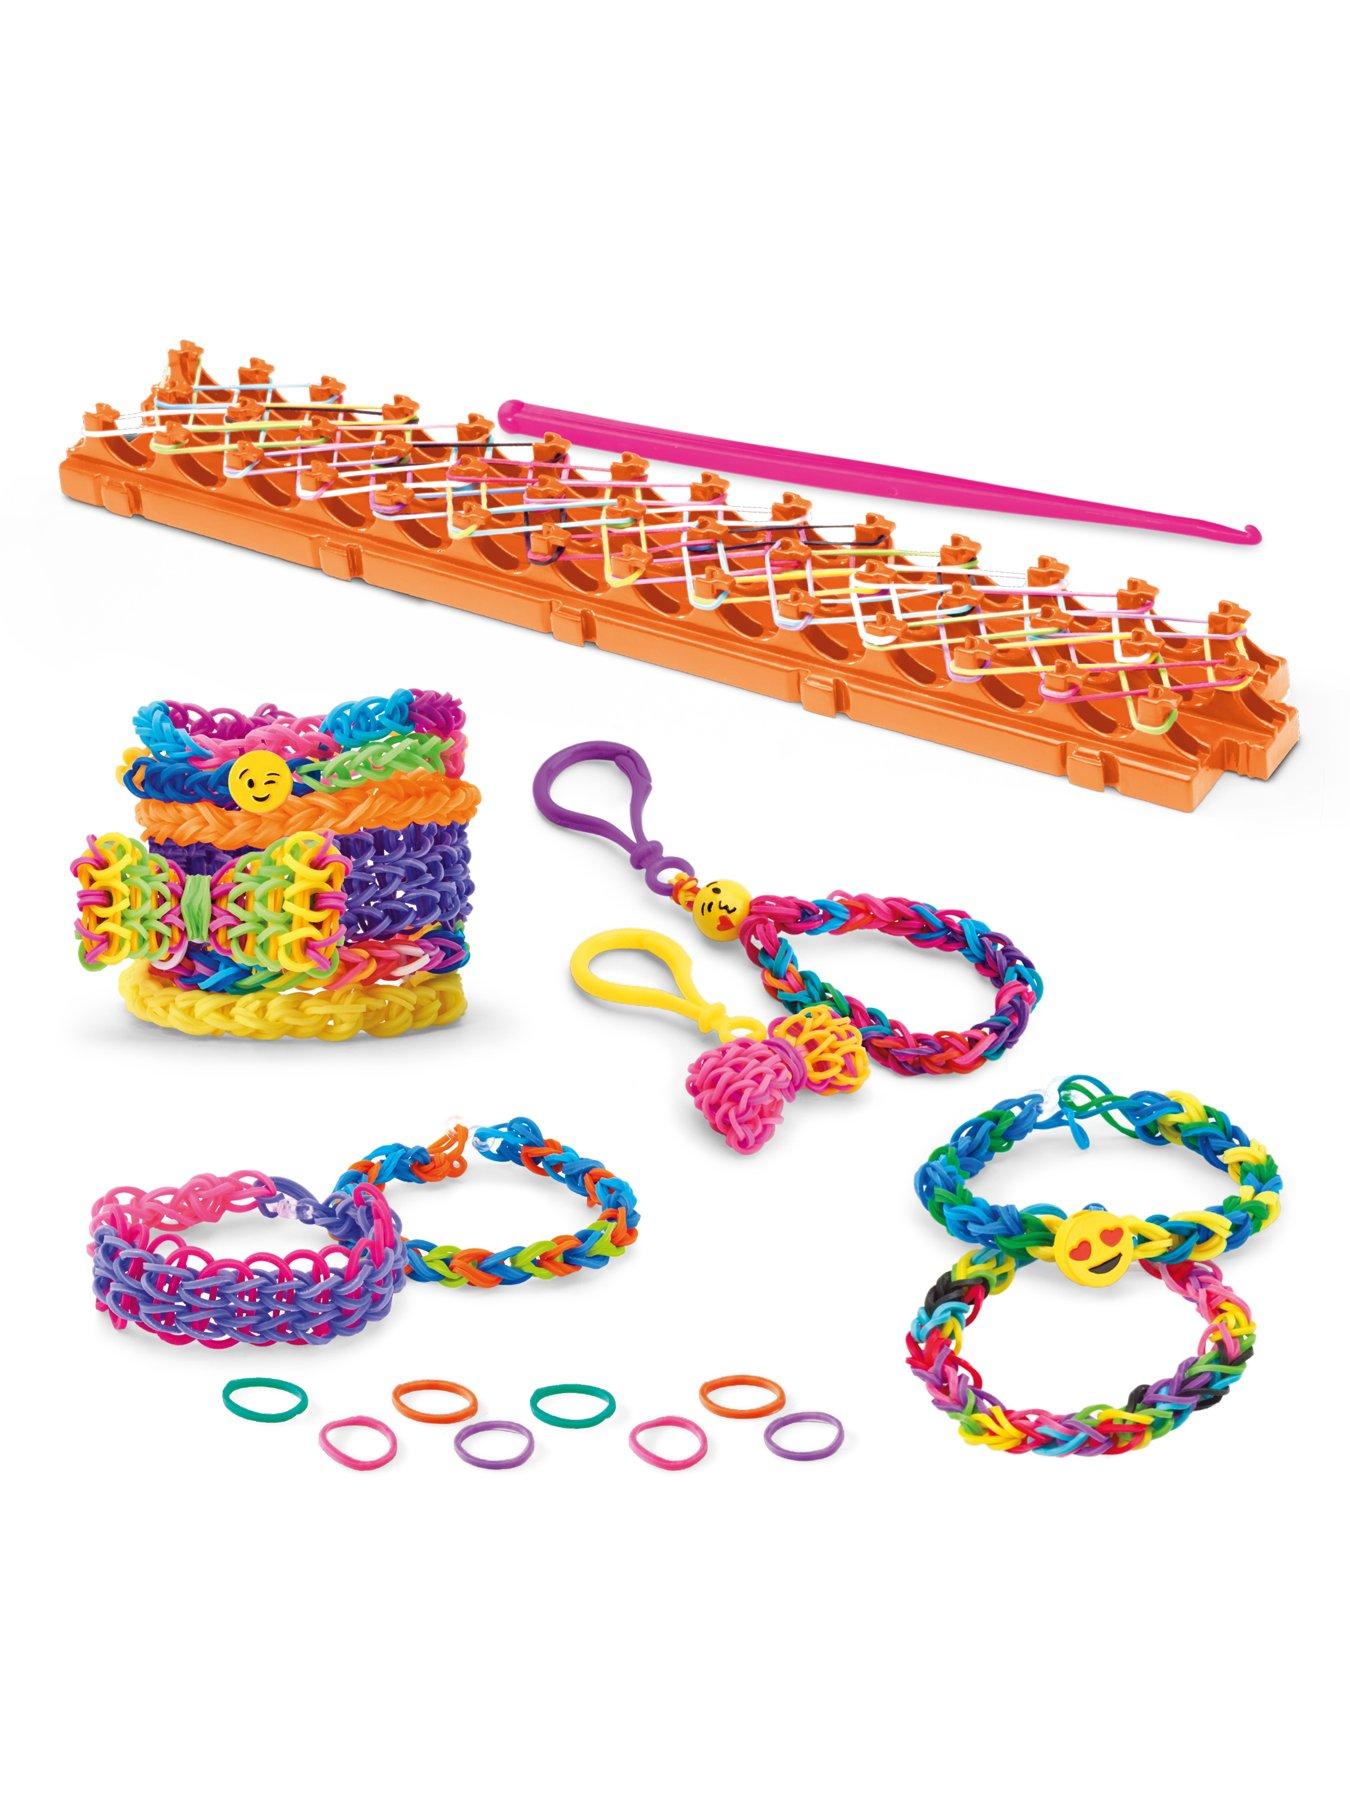 Cra-Z-Loom Cra-Z-Characters Loom Band Figure Making Kit Review 